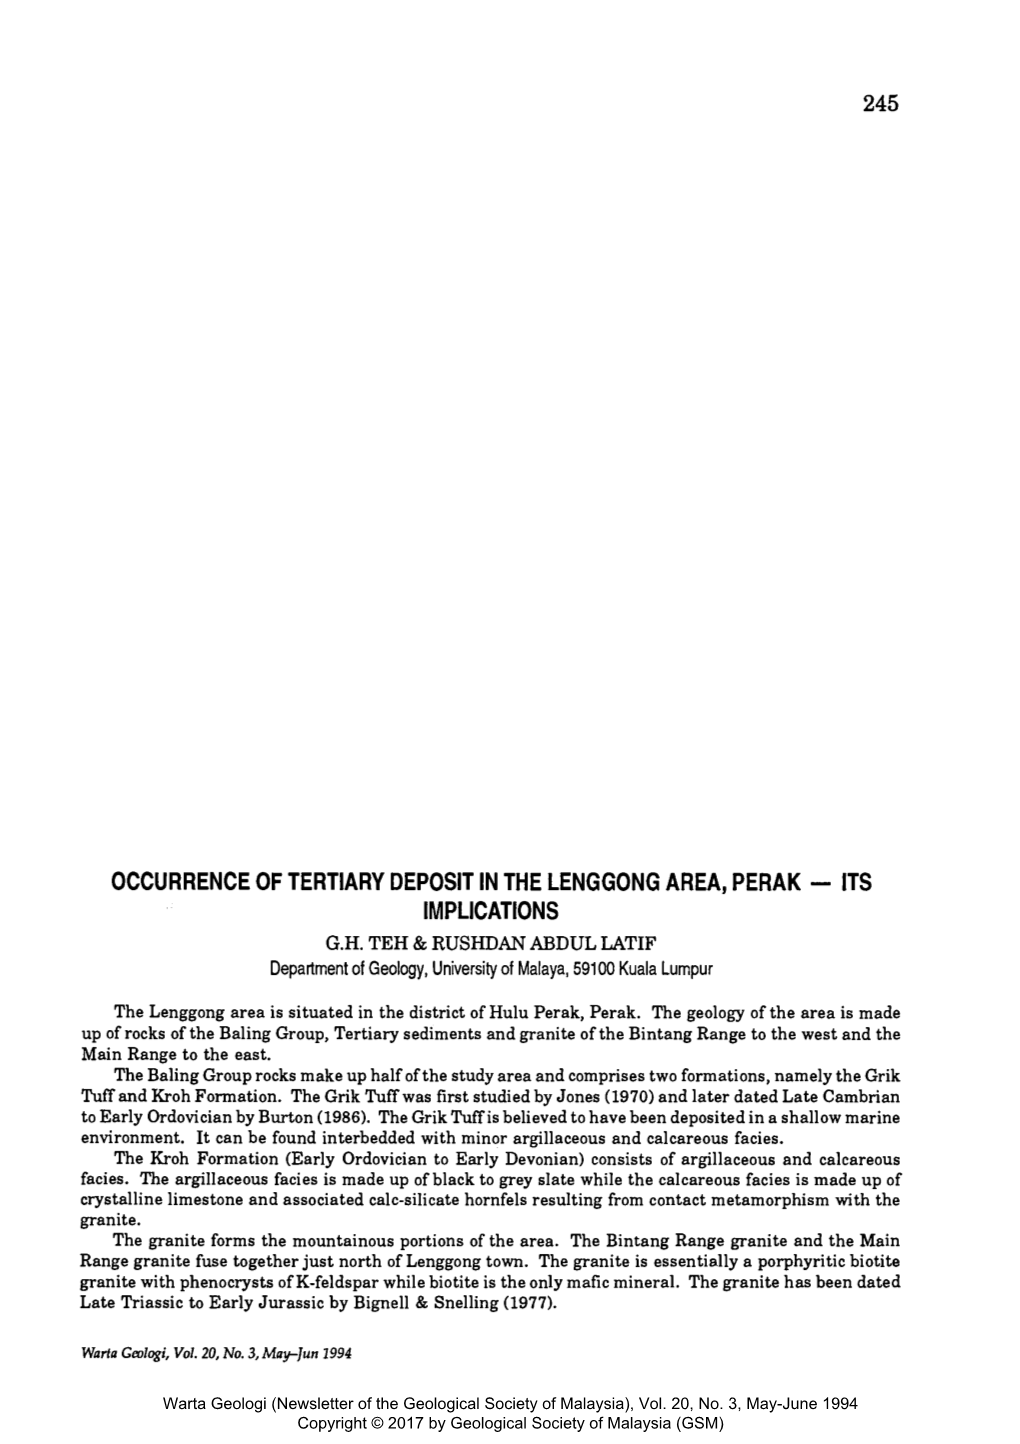 Occurrence of Tertiary Deposit in the Lenggong Area, Perak - Its Implications G.H